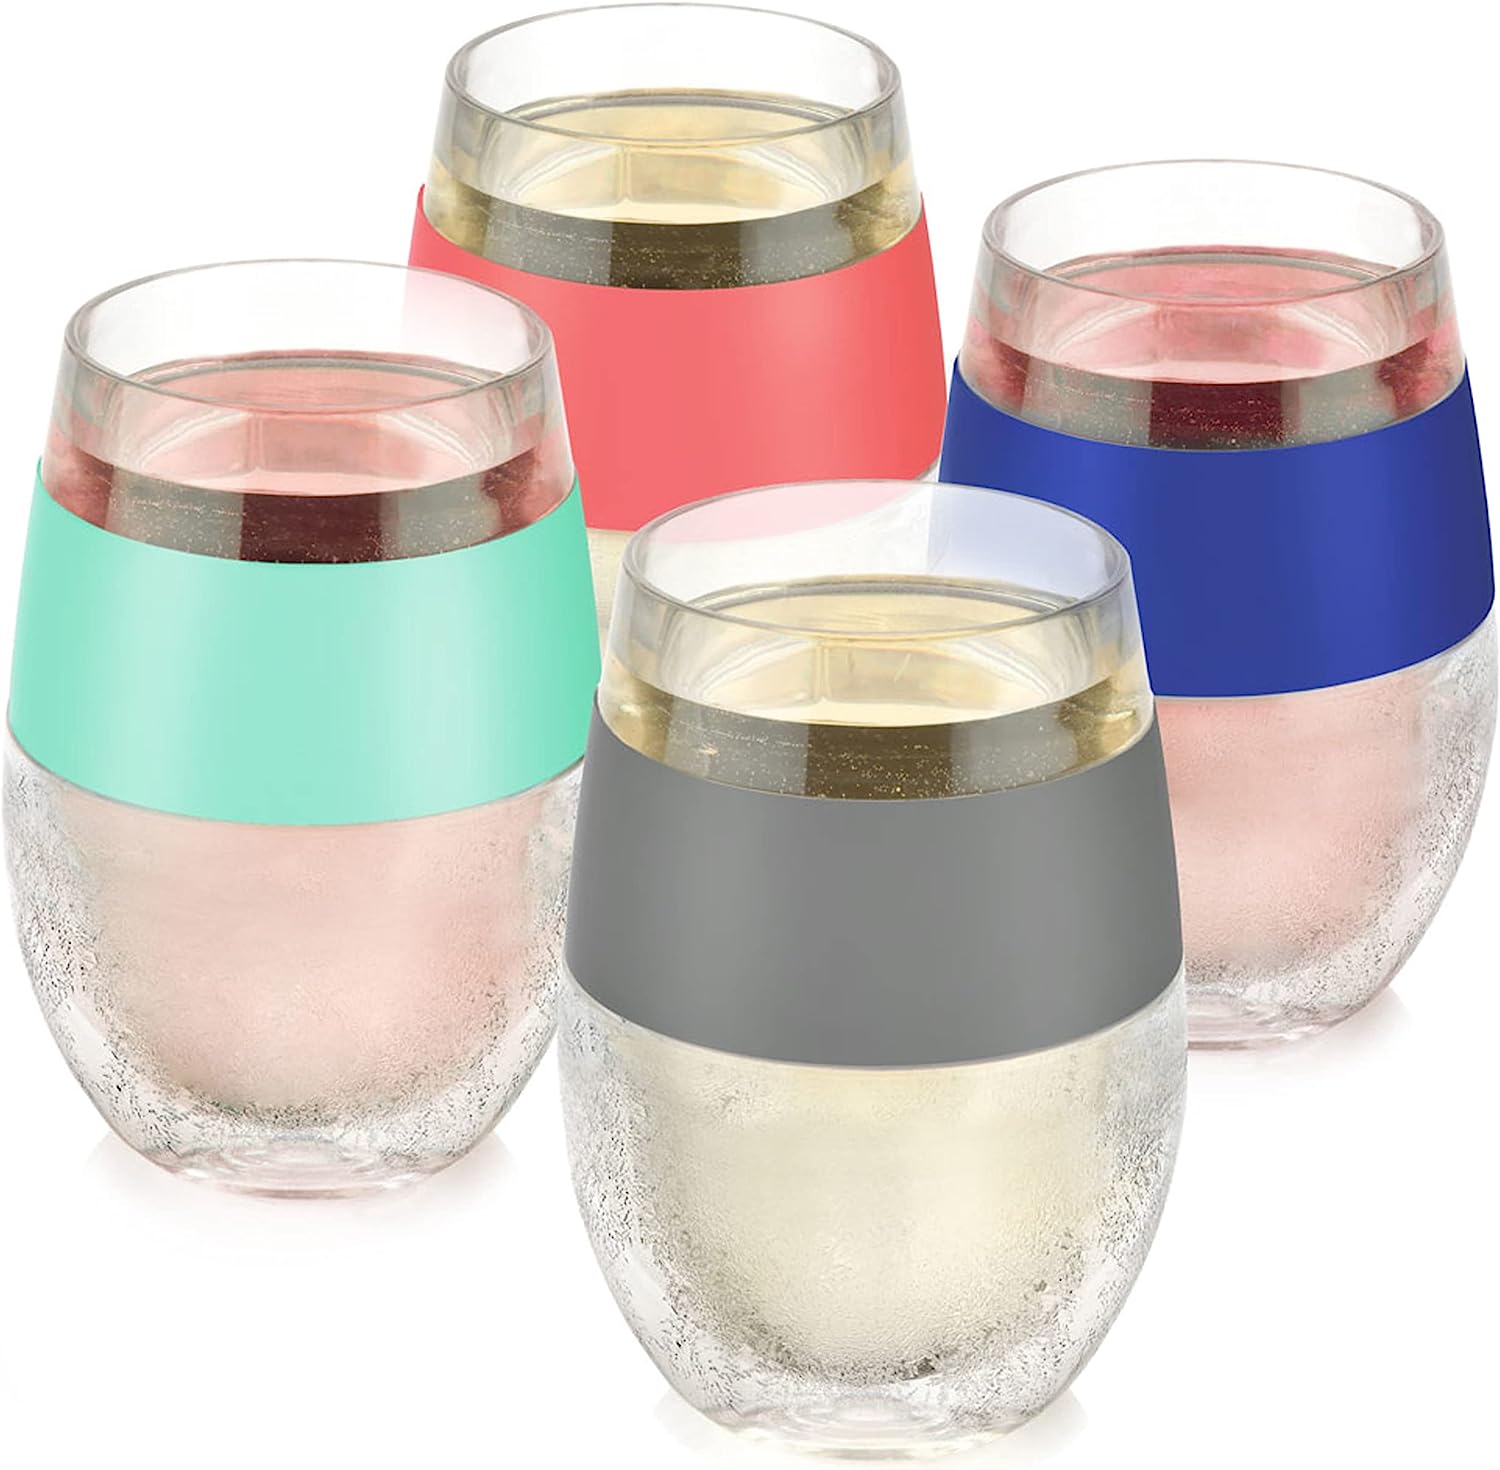 Freeze-Gel Insulated Beverage Cups (4) Keeps Drink Cold